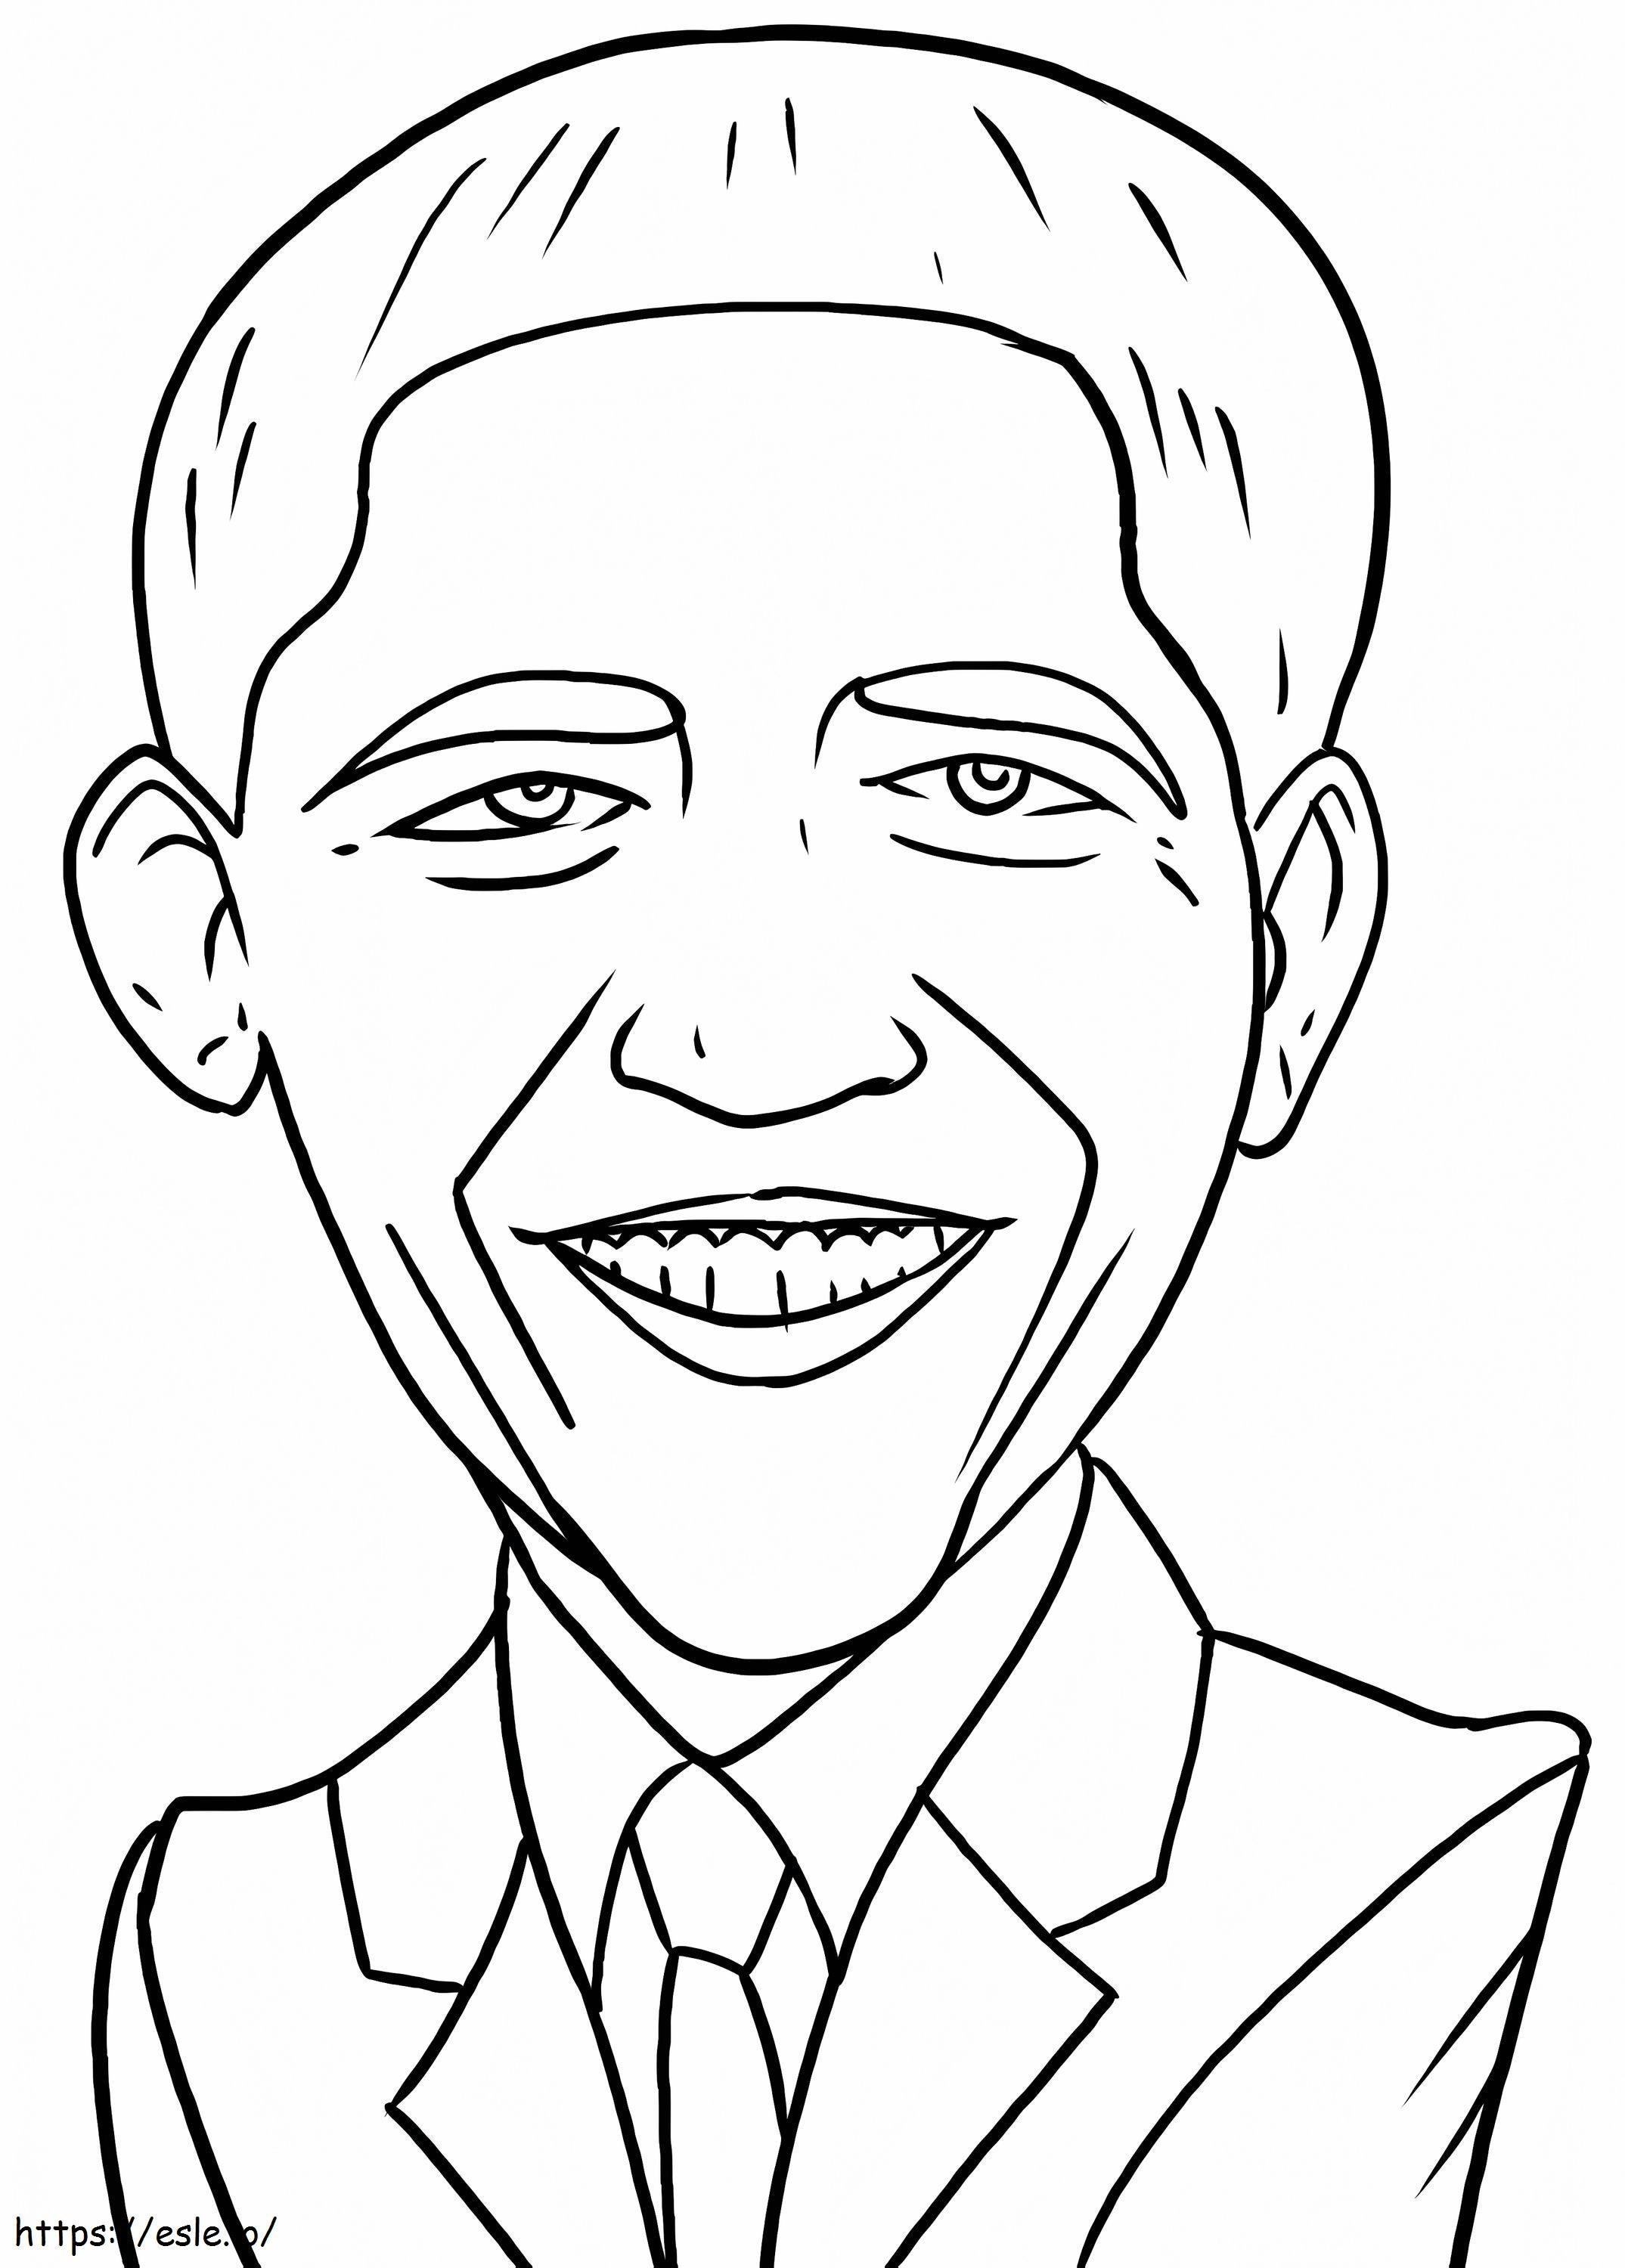 Obama Handsome coloring page